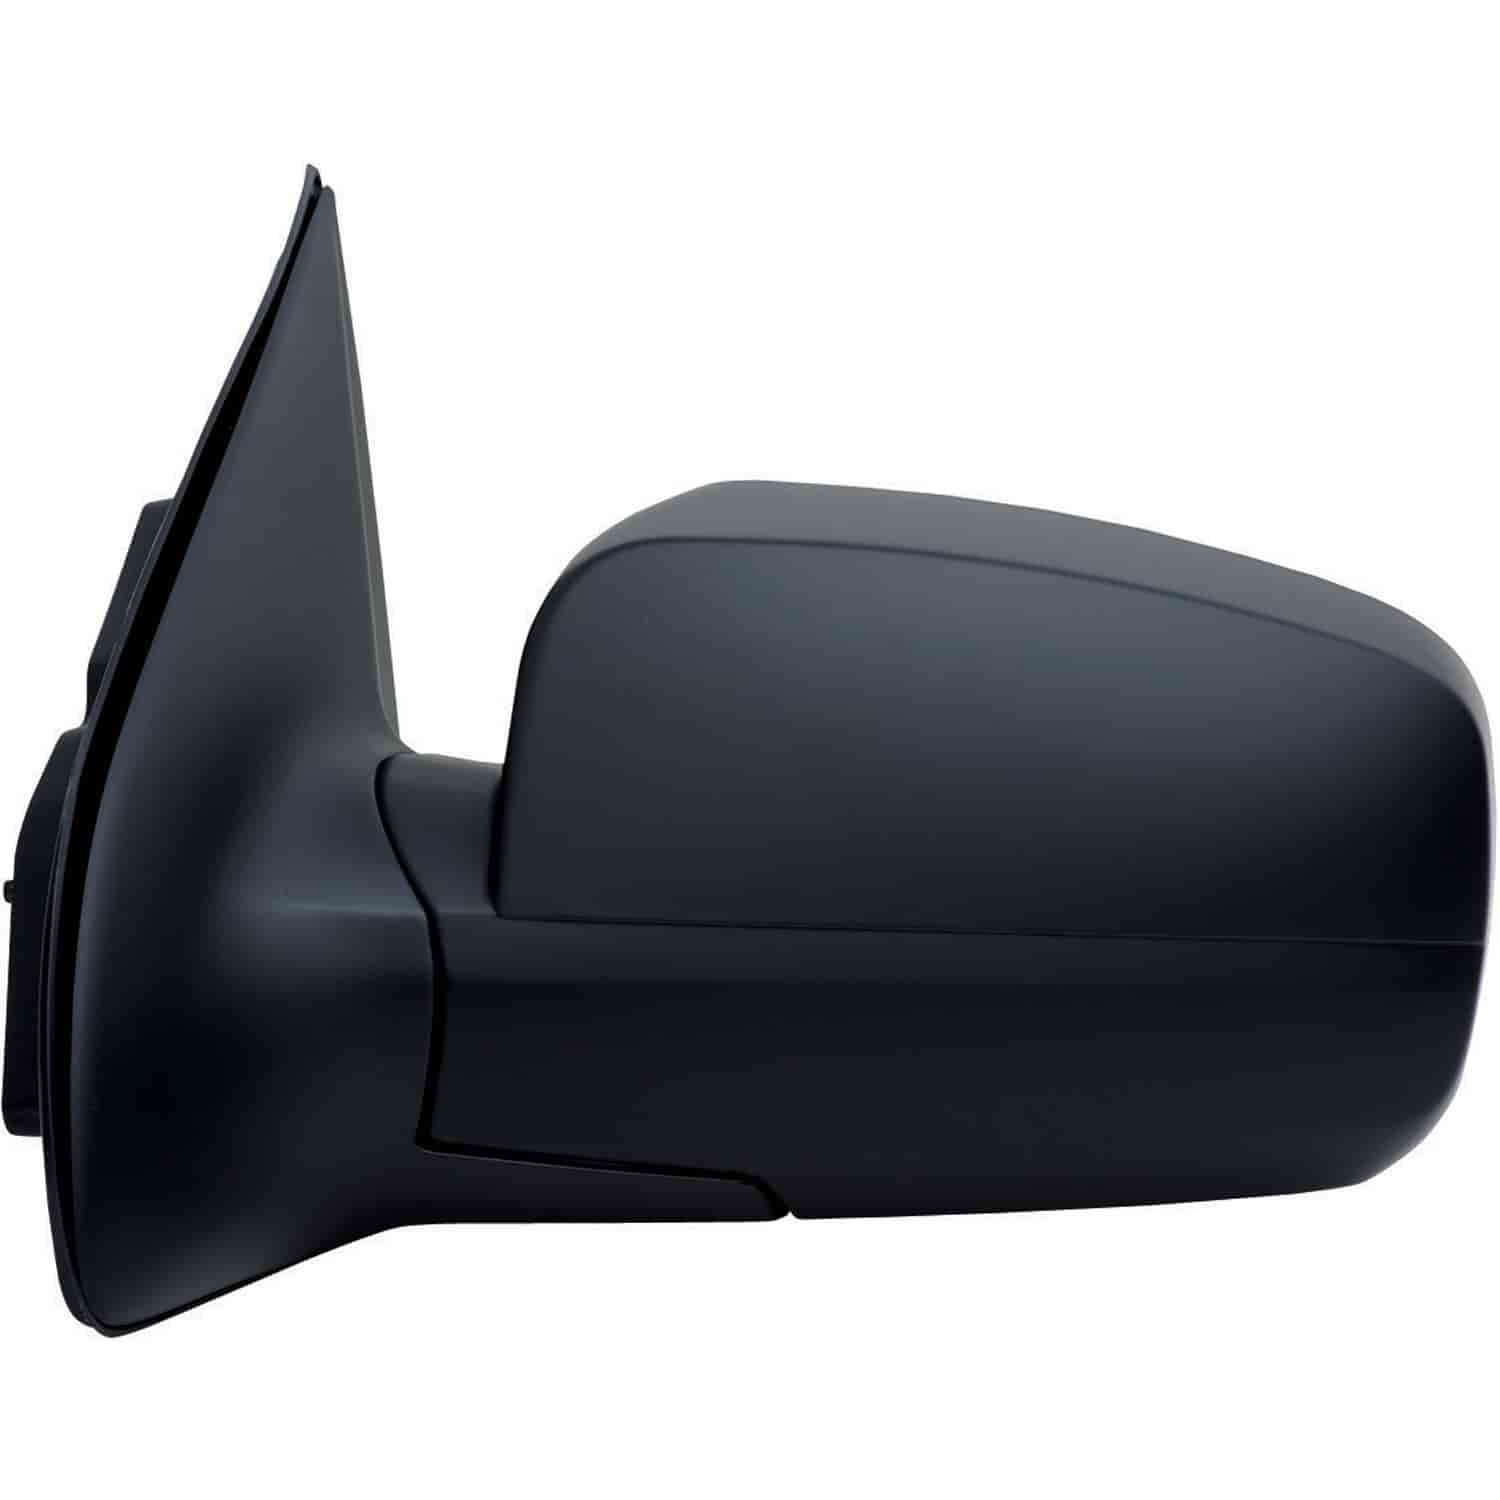 OEM Style Replacement mirror for 03-09 Kia Sorento driver side mirror tested to fit and function lik